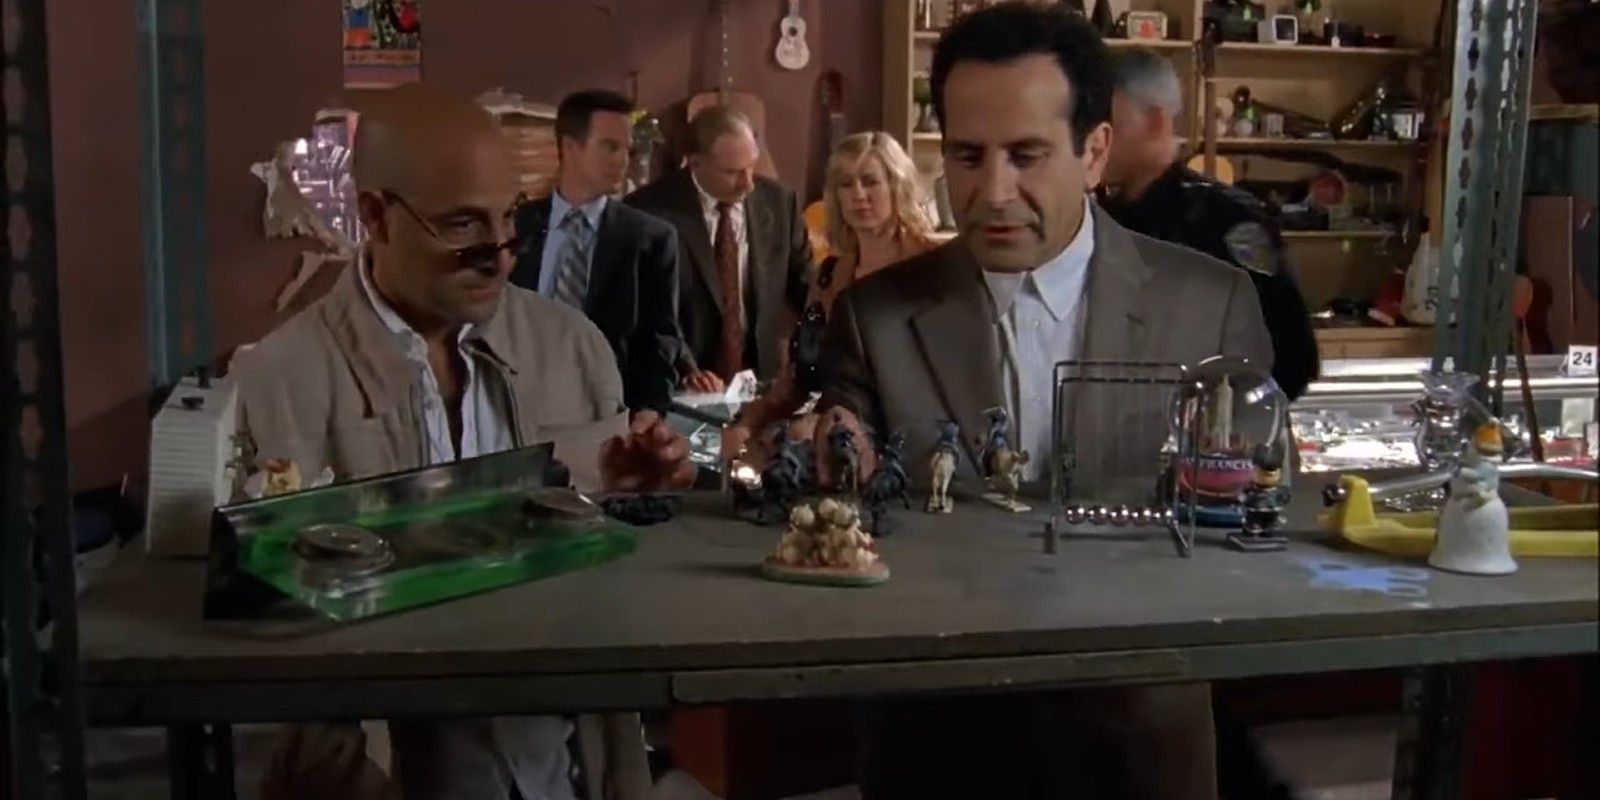 tony shalhoub as Monk and stanley tucci in mr monk and the actor